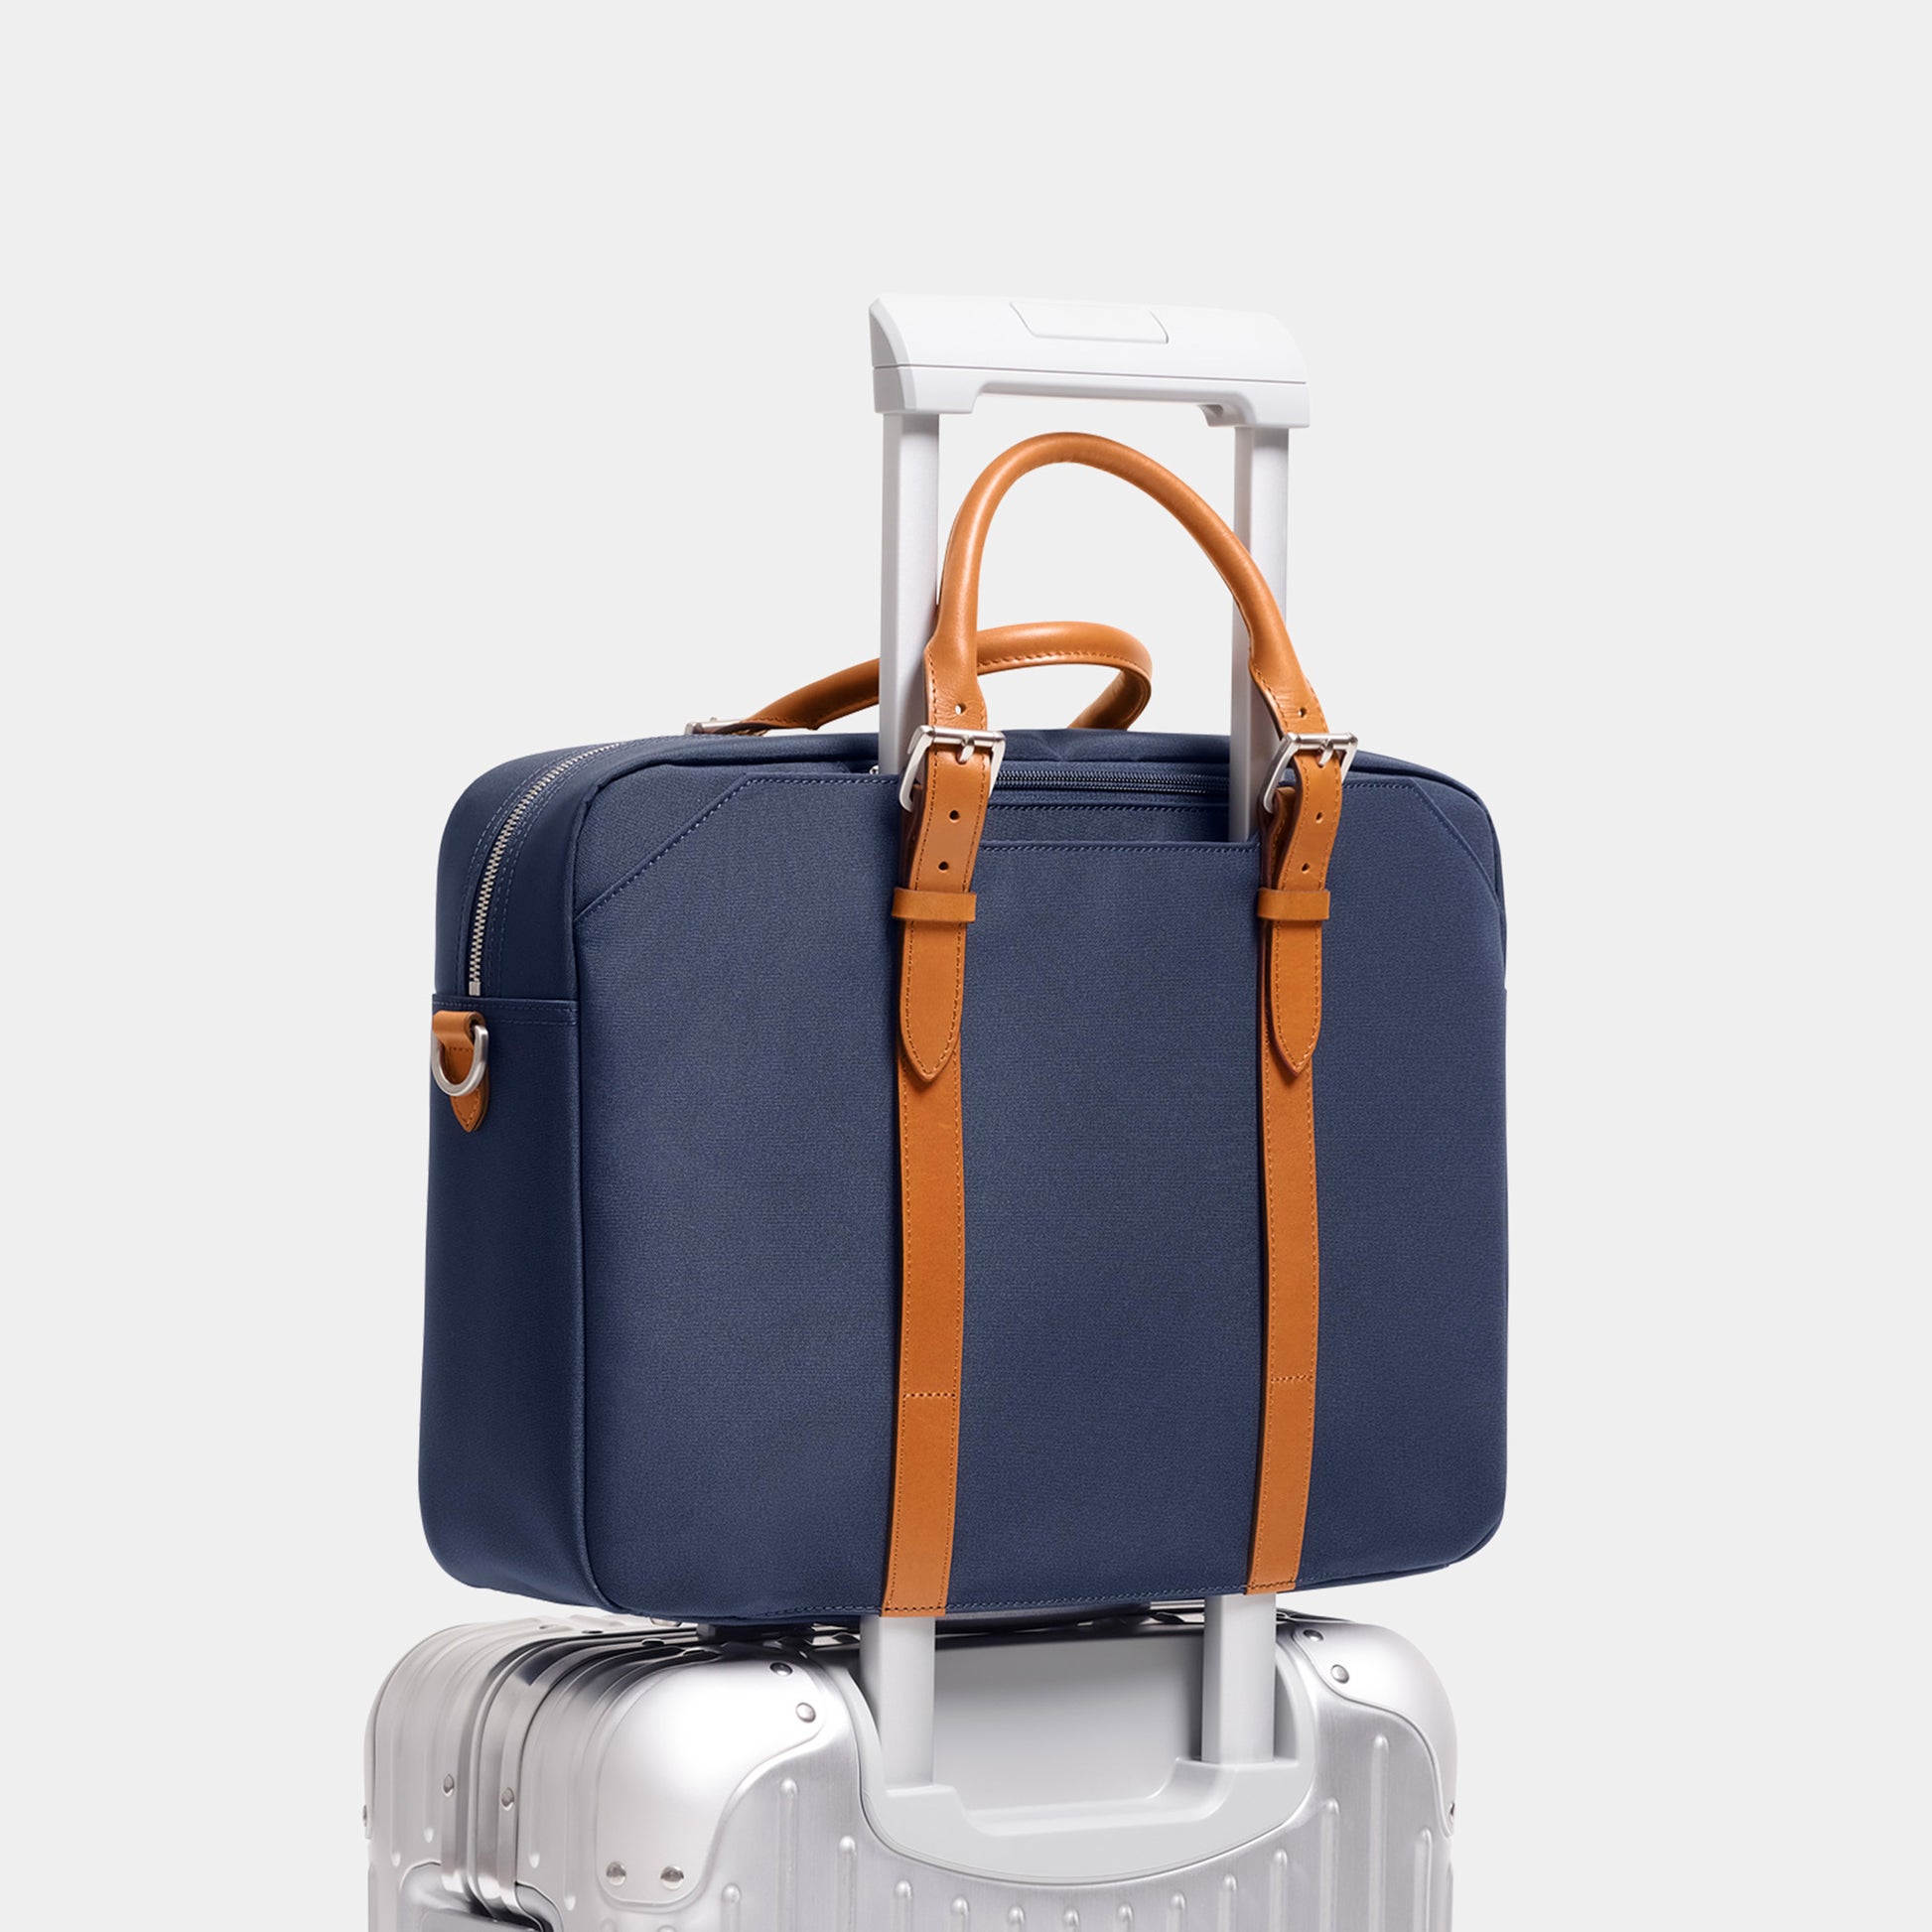 Away Luggage Relaunches Their Classic Suitcases in New Colors With Improved  Sustainability